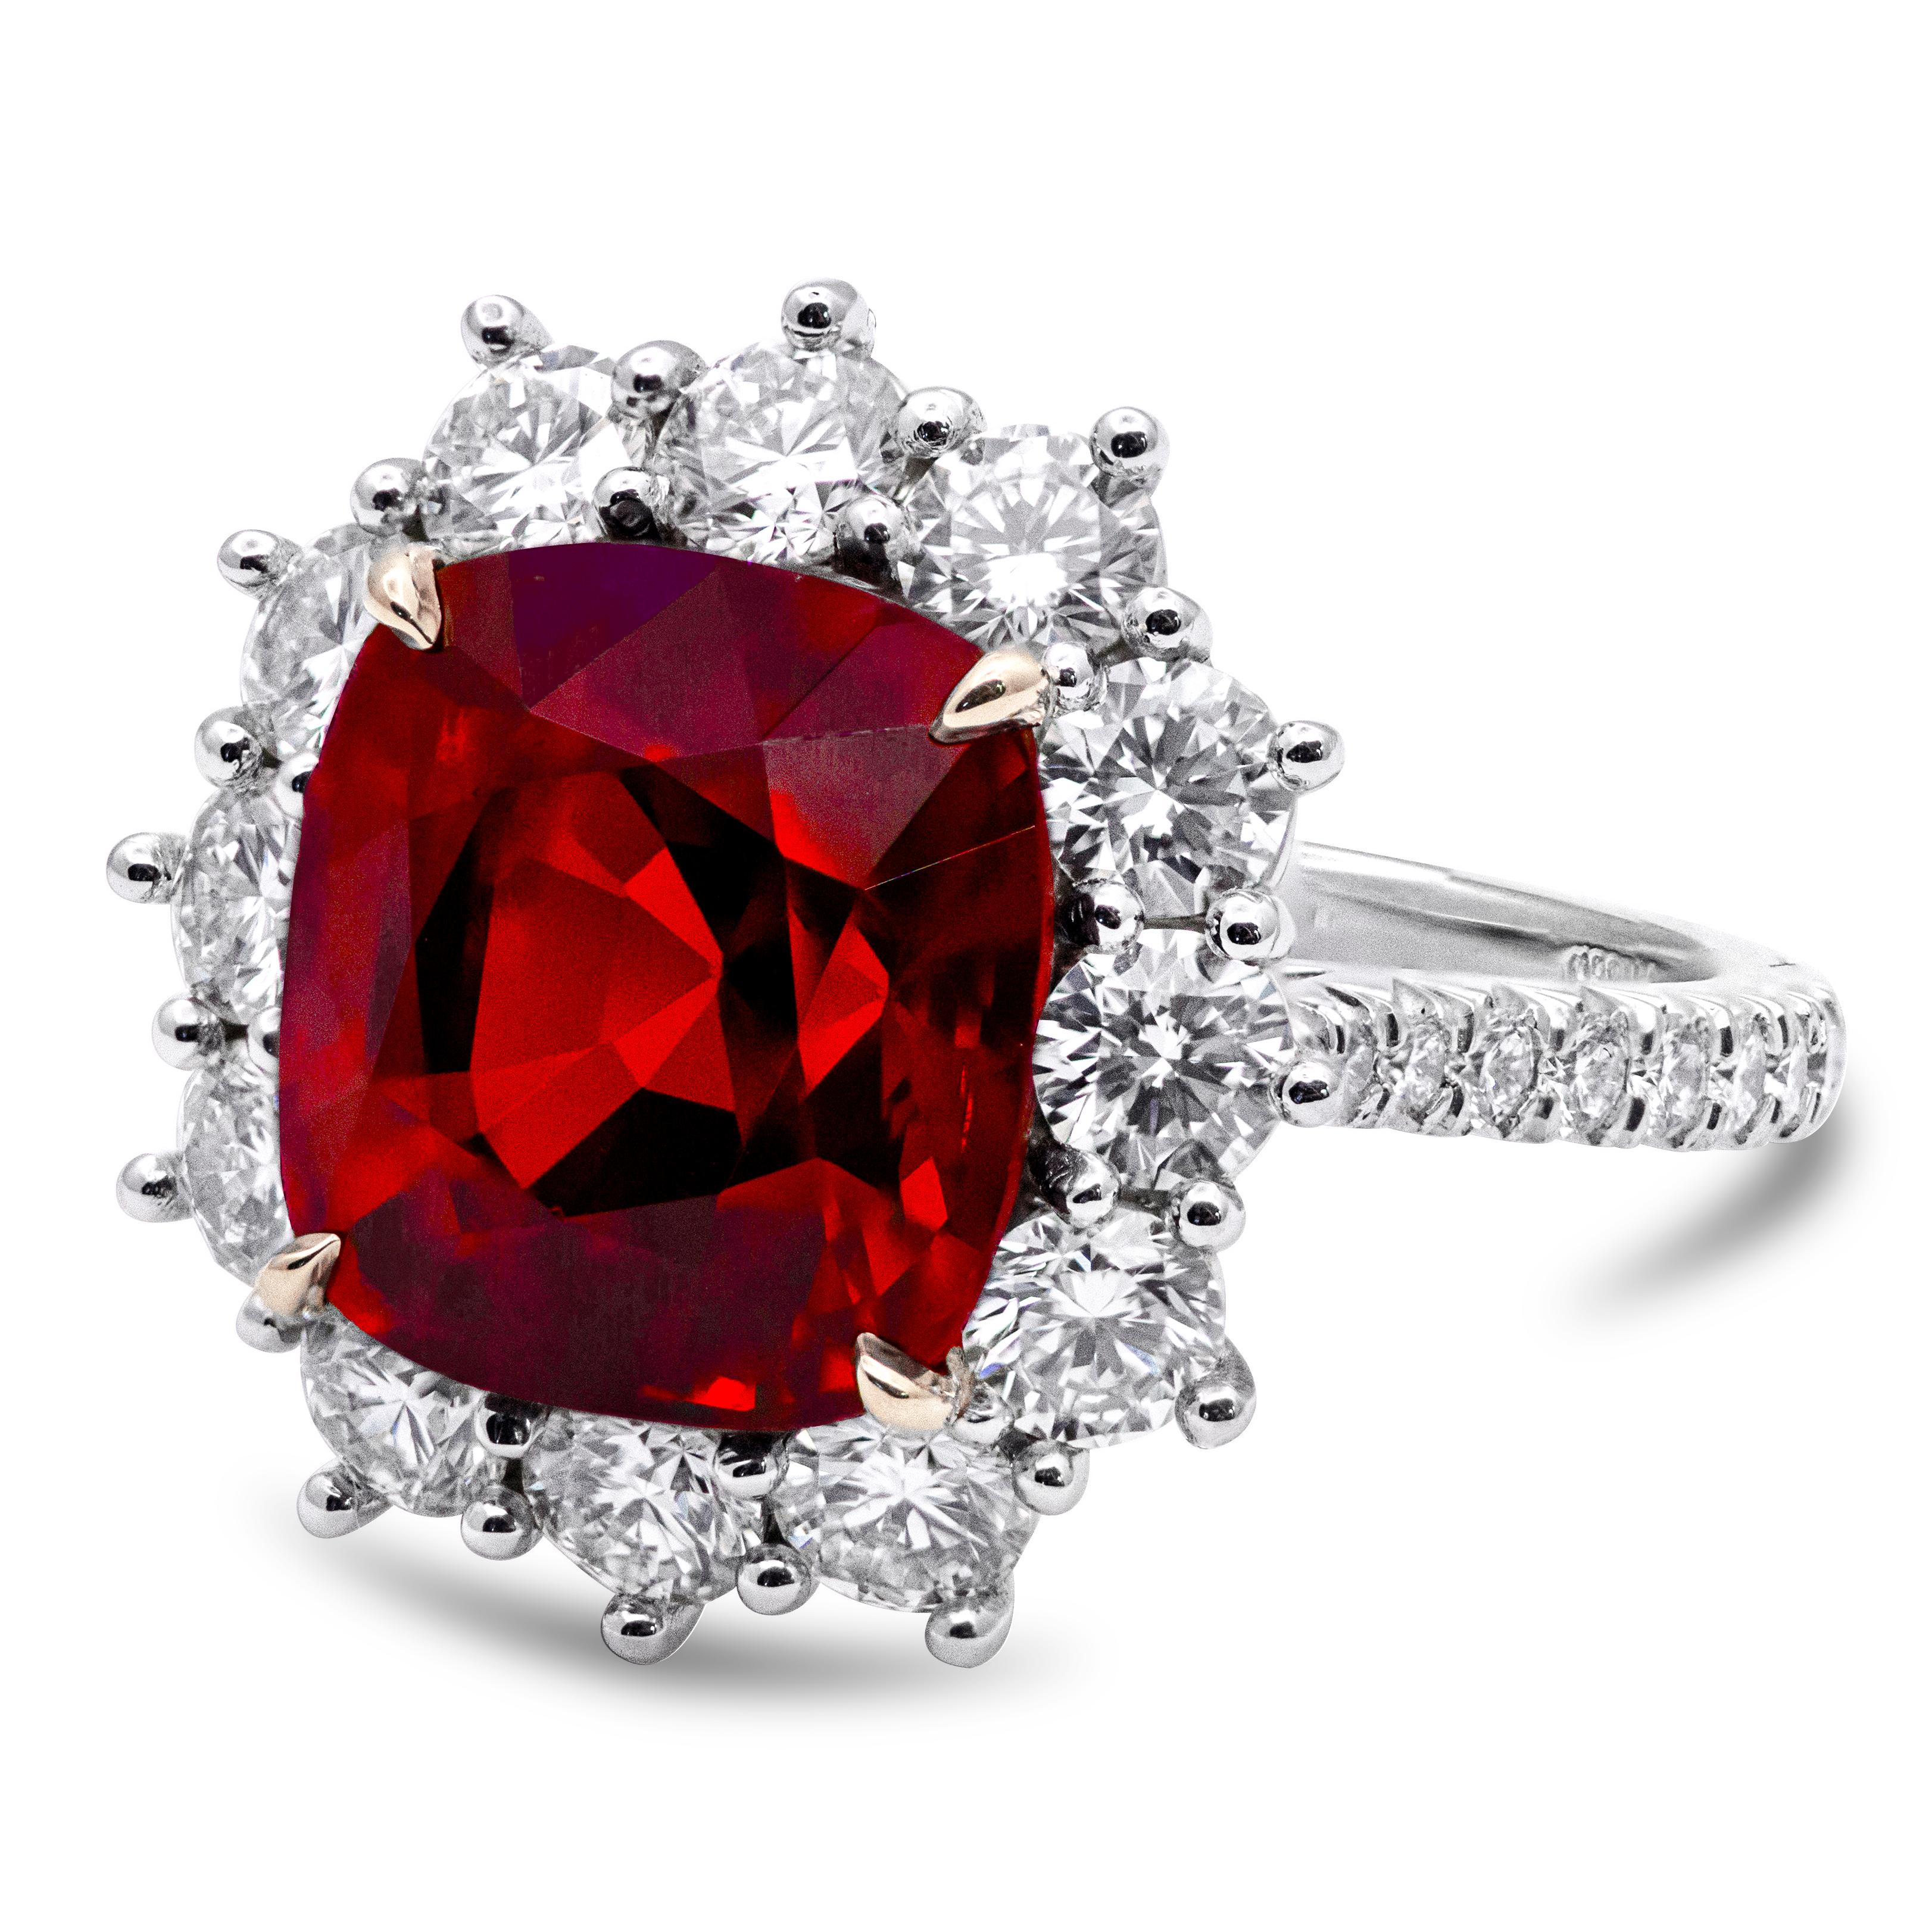 A marvelous fashion ring features a C. Dunaigre Certified Cushion Cut Natural Red Spinel weighing 6.92 carats, Burma Origin, with no indications of heat treatment.  Surrounded by a row of brilliant round diamonds and accented with round diamonds